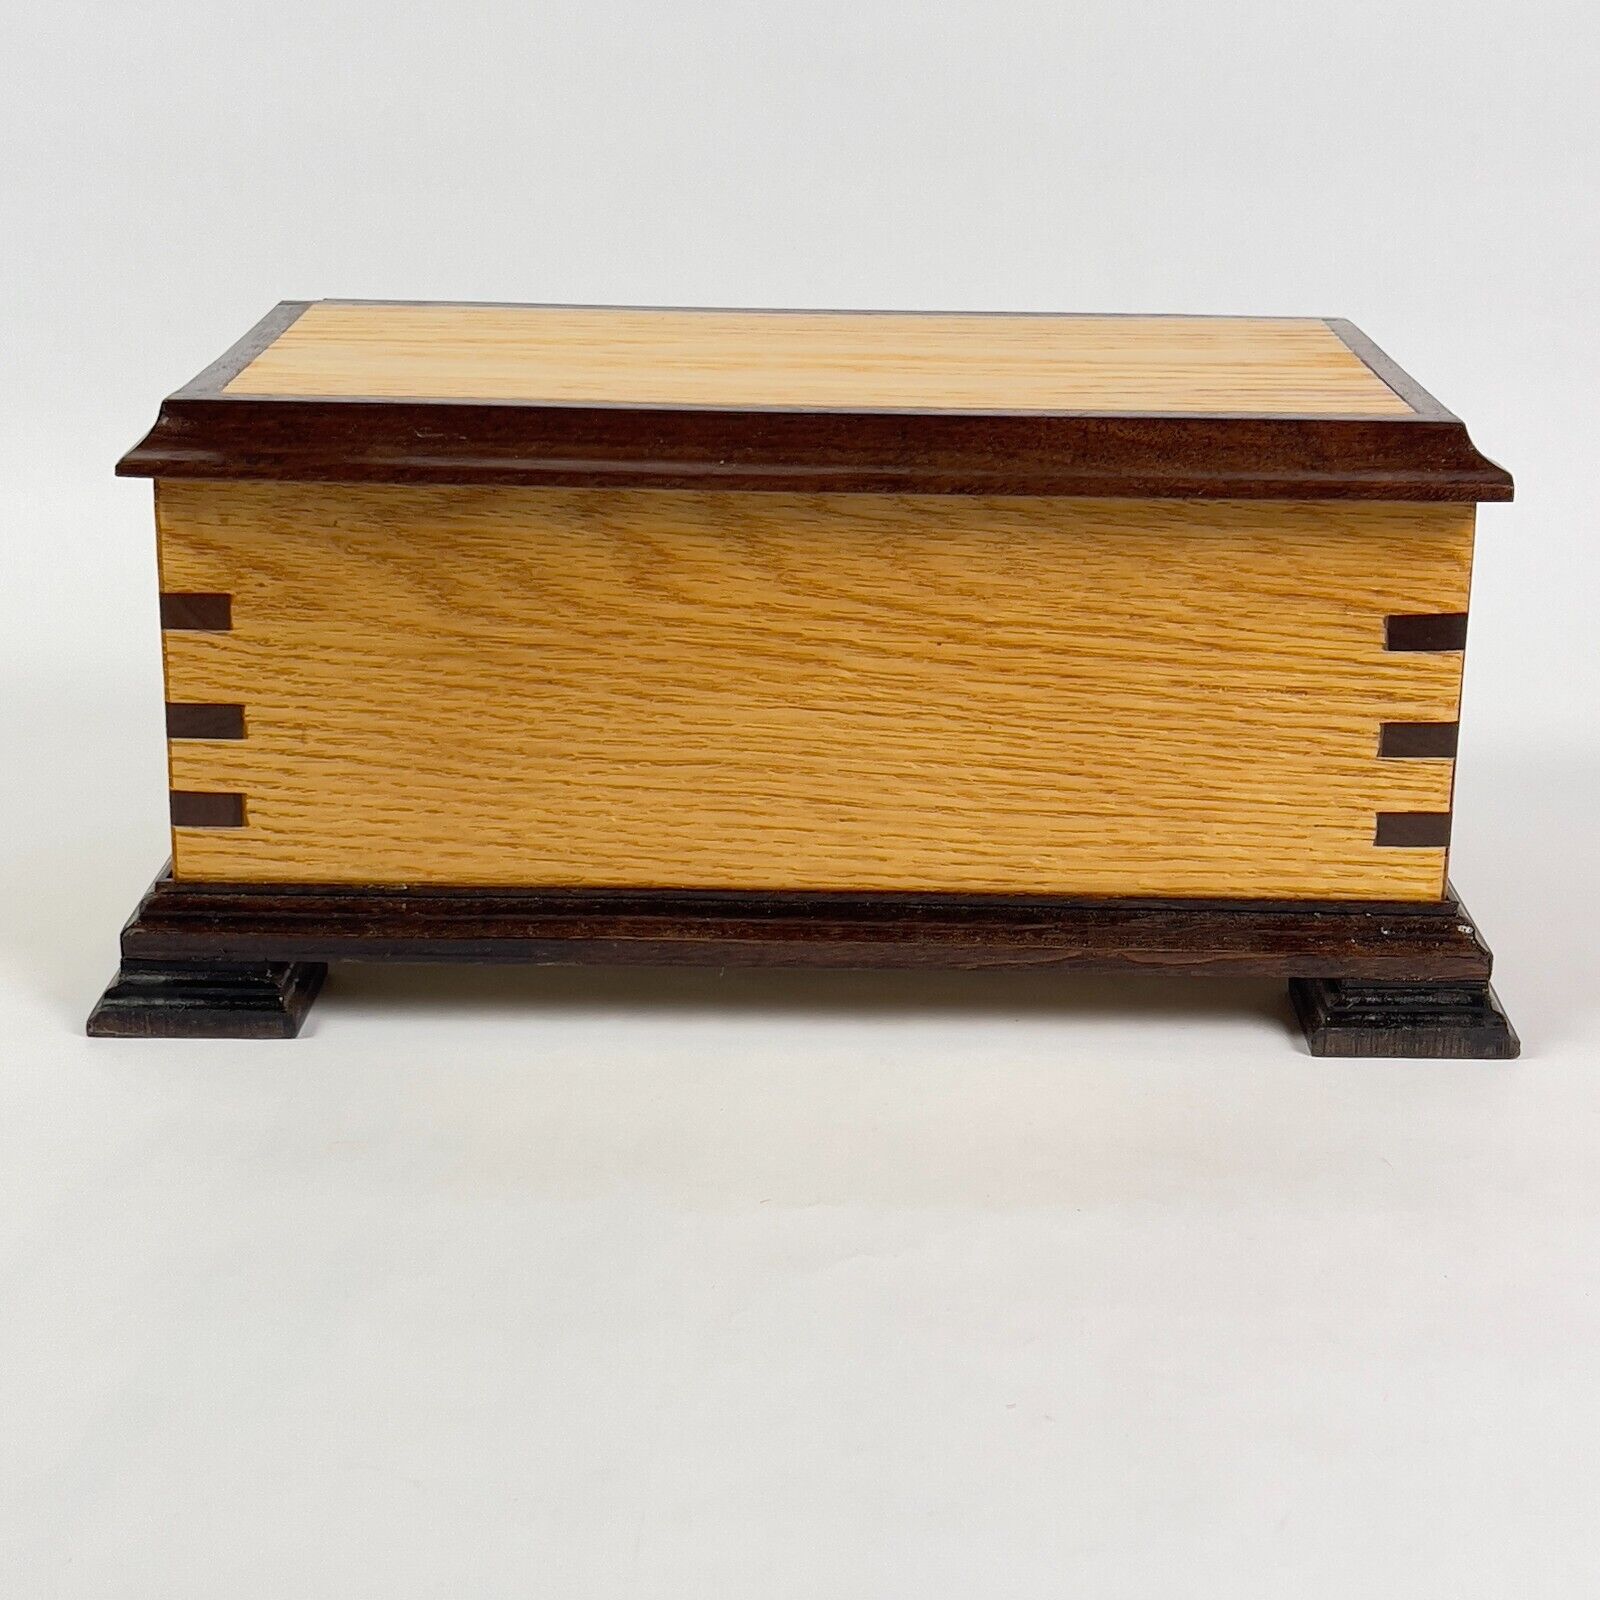 Hade Made Large Wooden 2 tone Trinket, Storage or Jewelry Box 14\